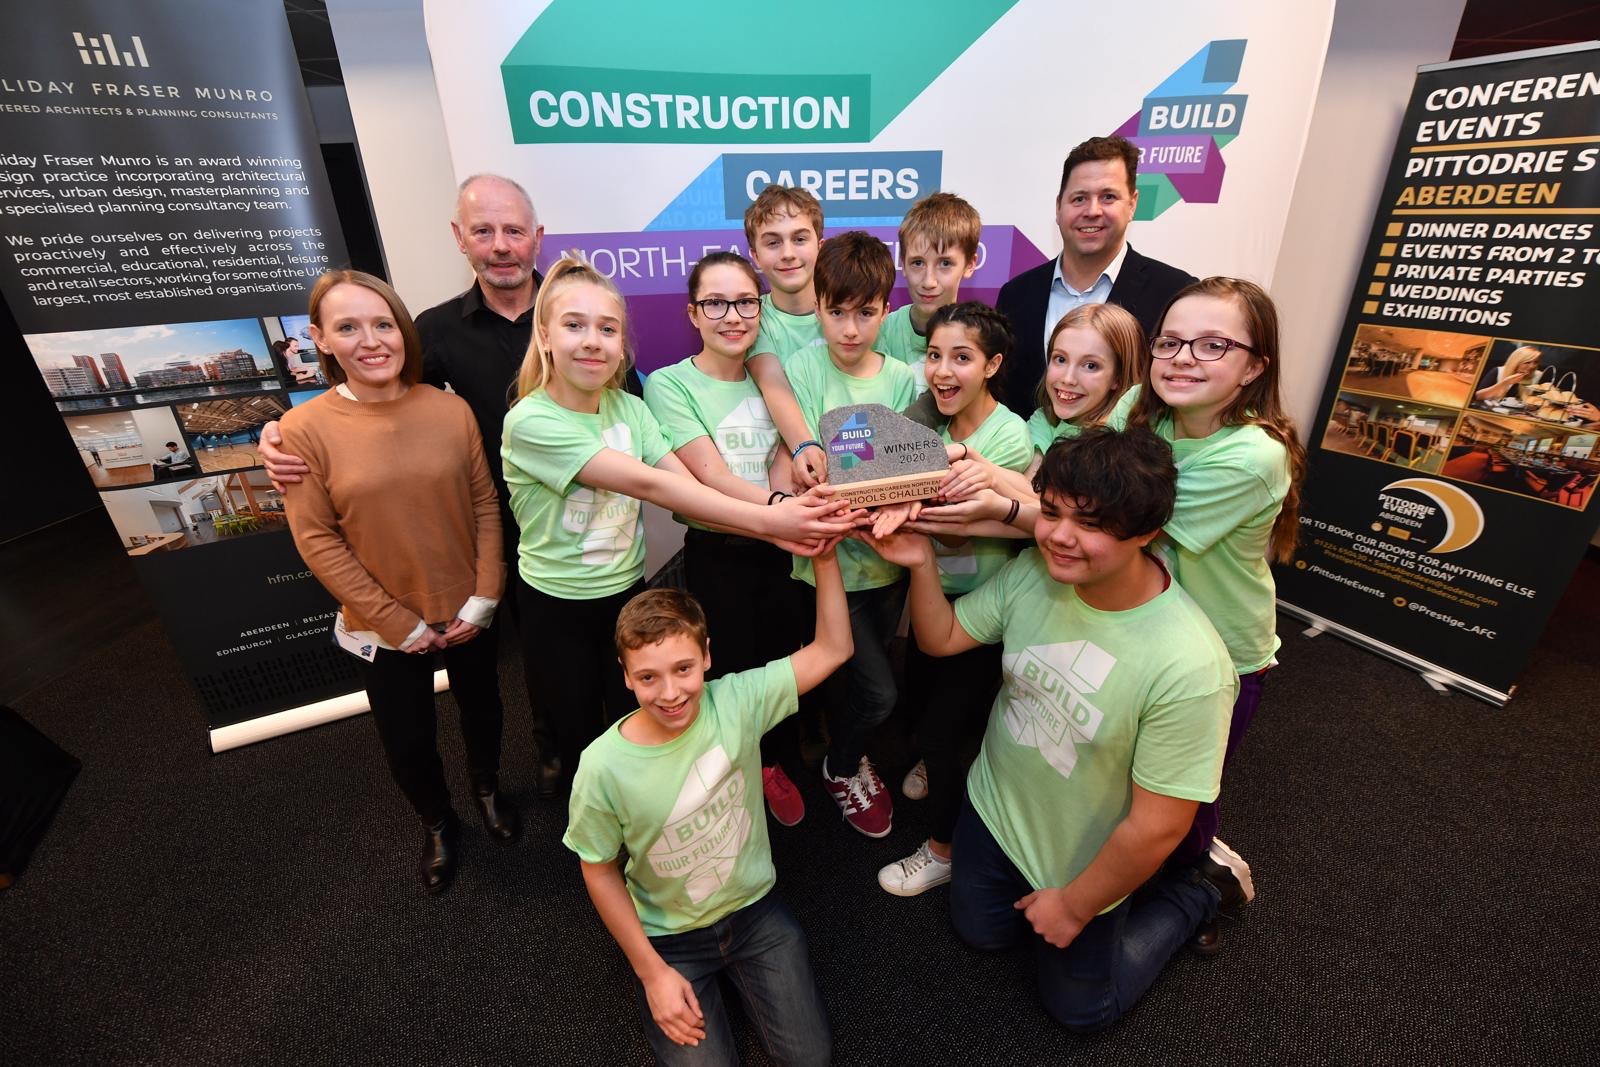 Building for the future: Capturing young people’s imaginations for a career in construction